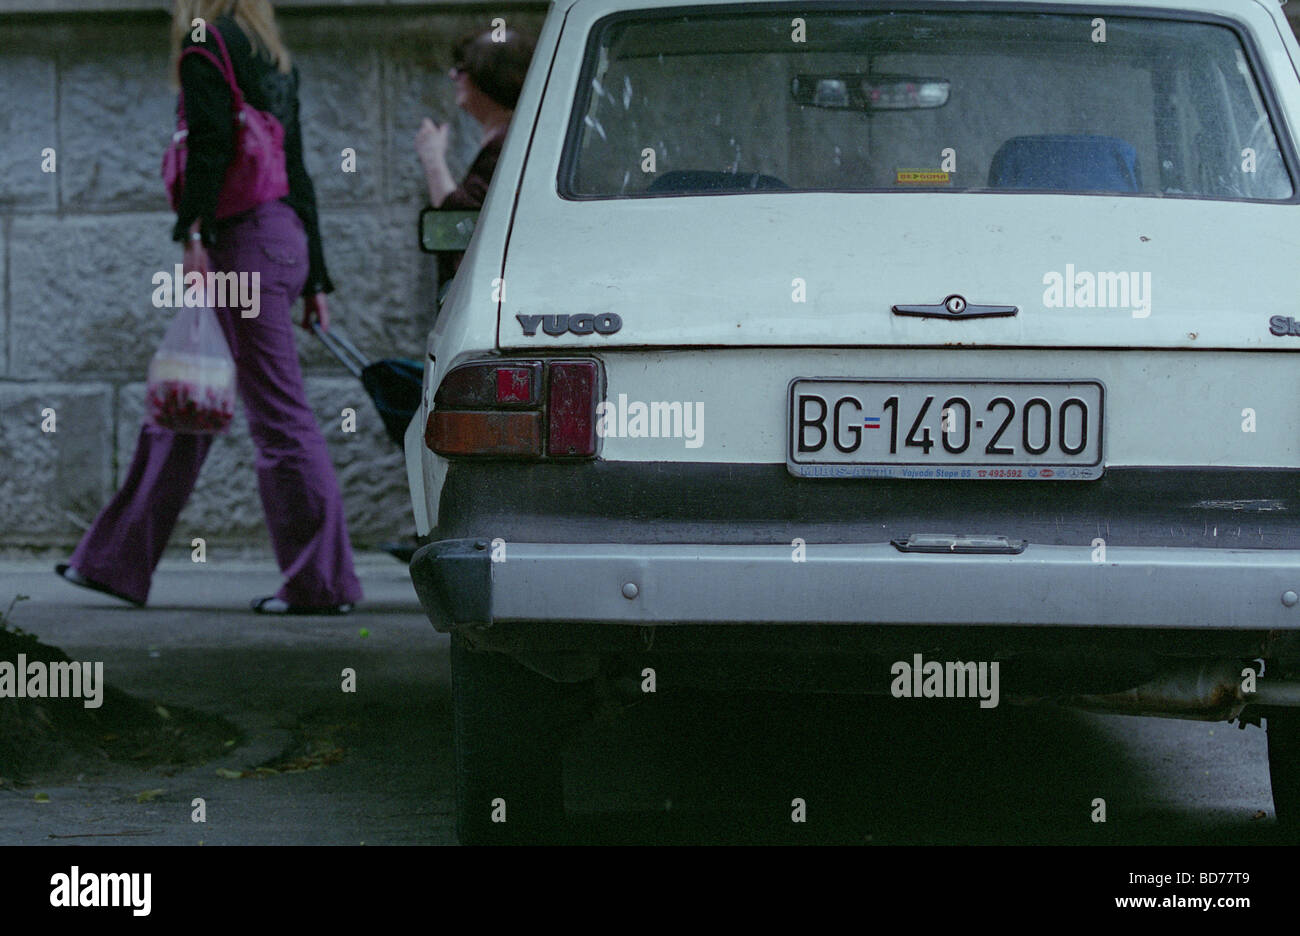 Parking white Yugo car with Belgrade license plate and pedestrians behind, Serbia, Balkans Stock Photo